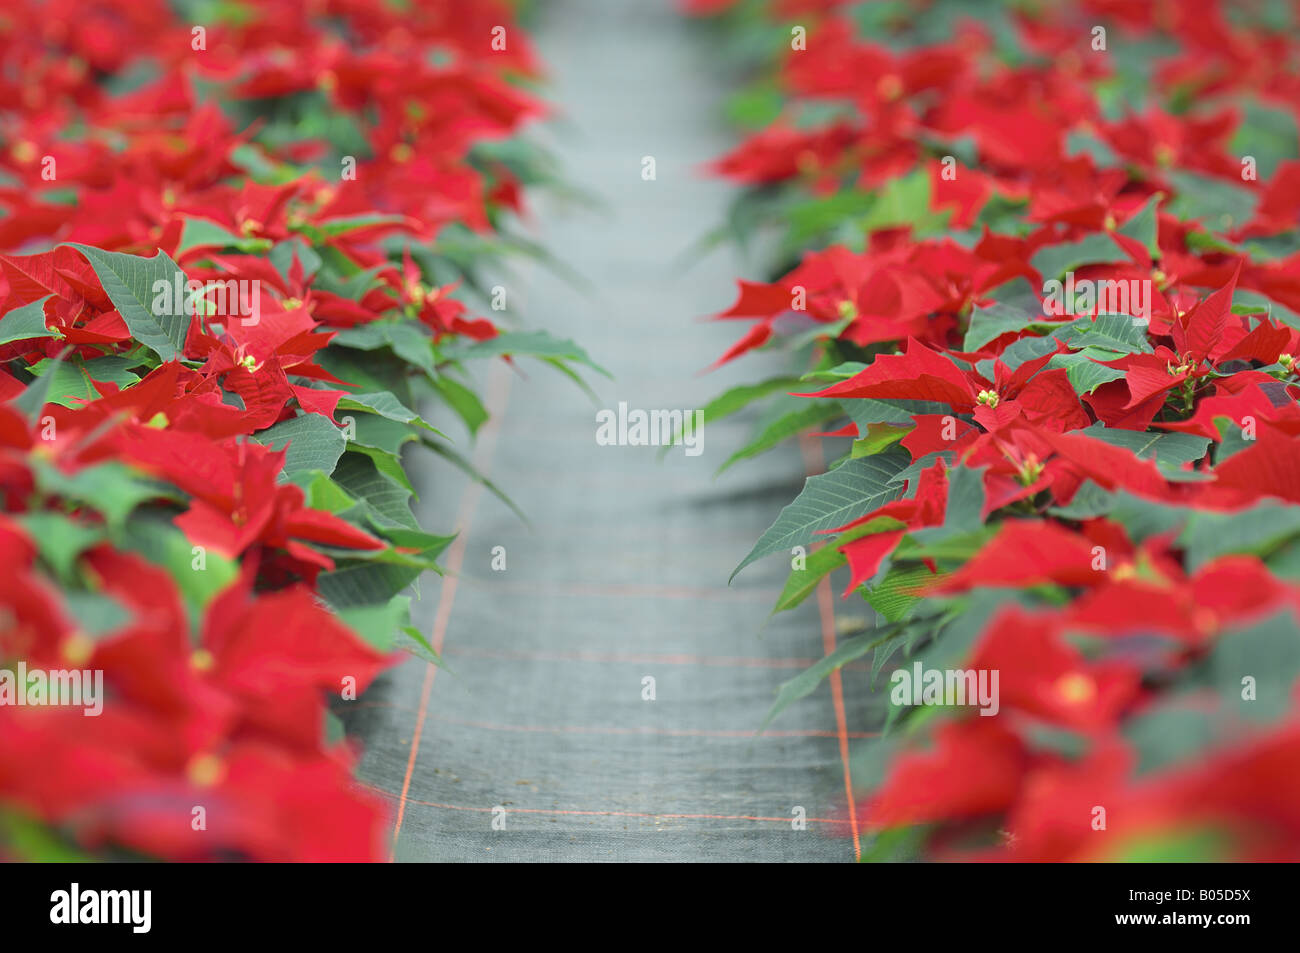 poinsettia (Euphorbia pulcherrima), plants with magnificent coloured bracts in a garden center Stock Photo